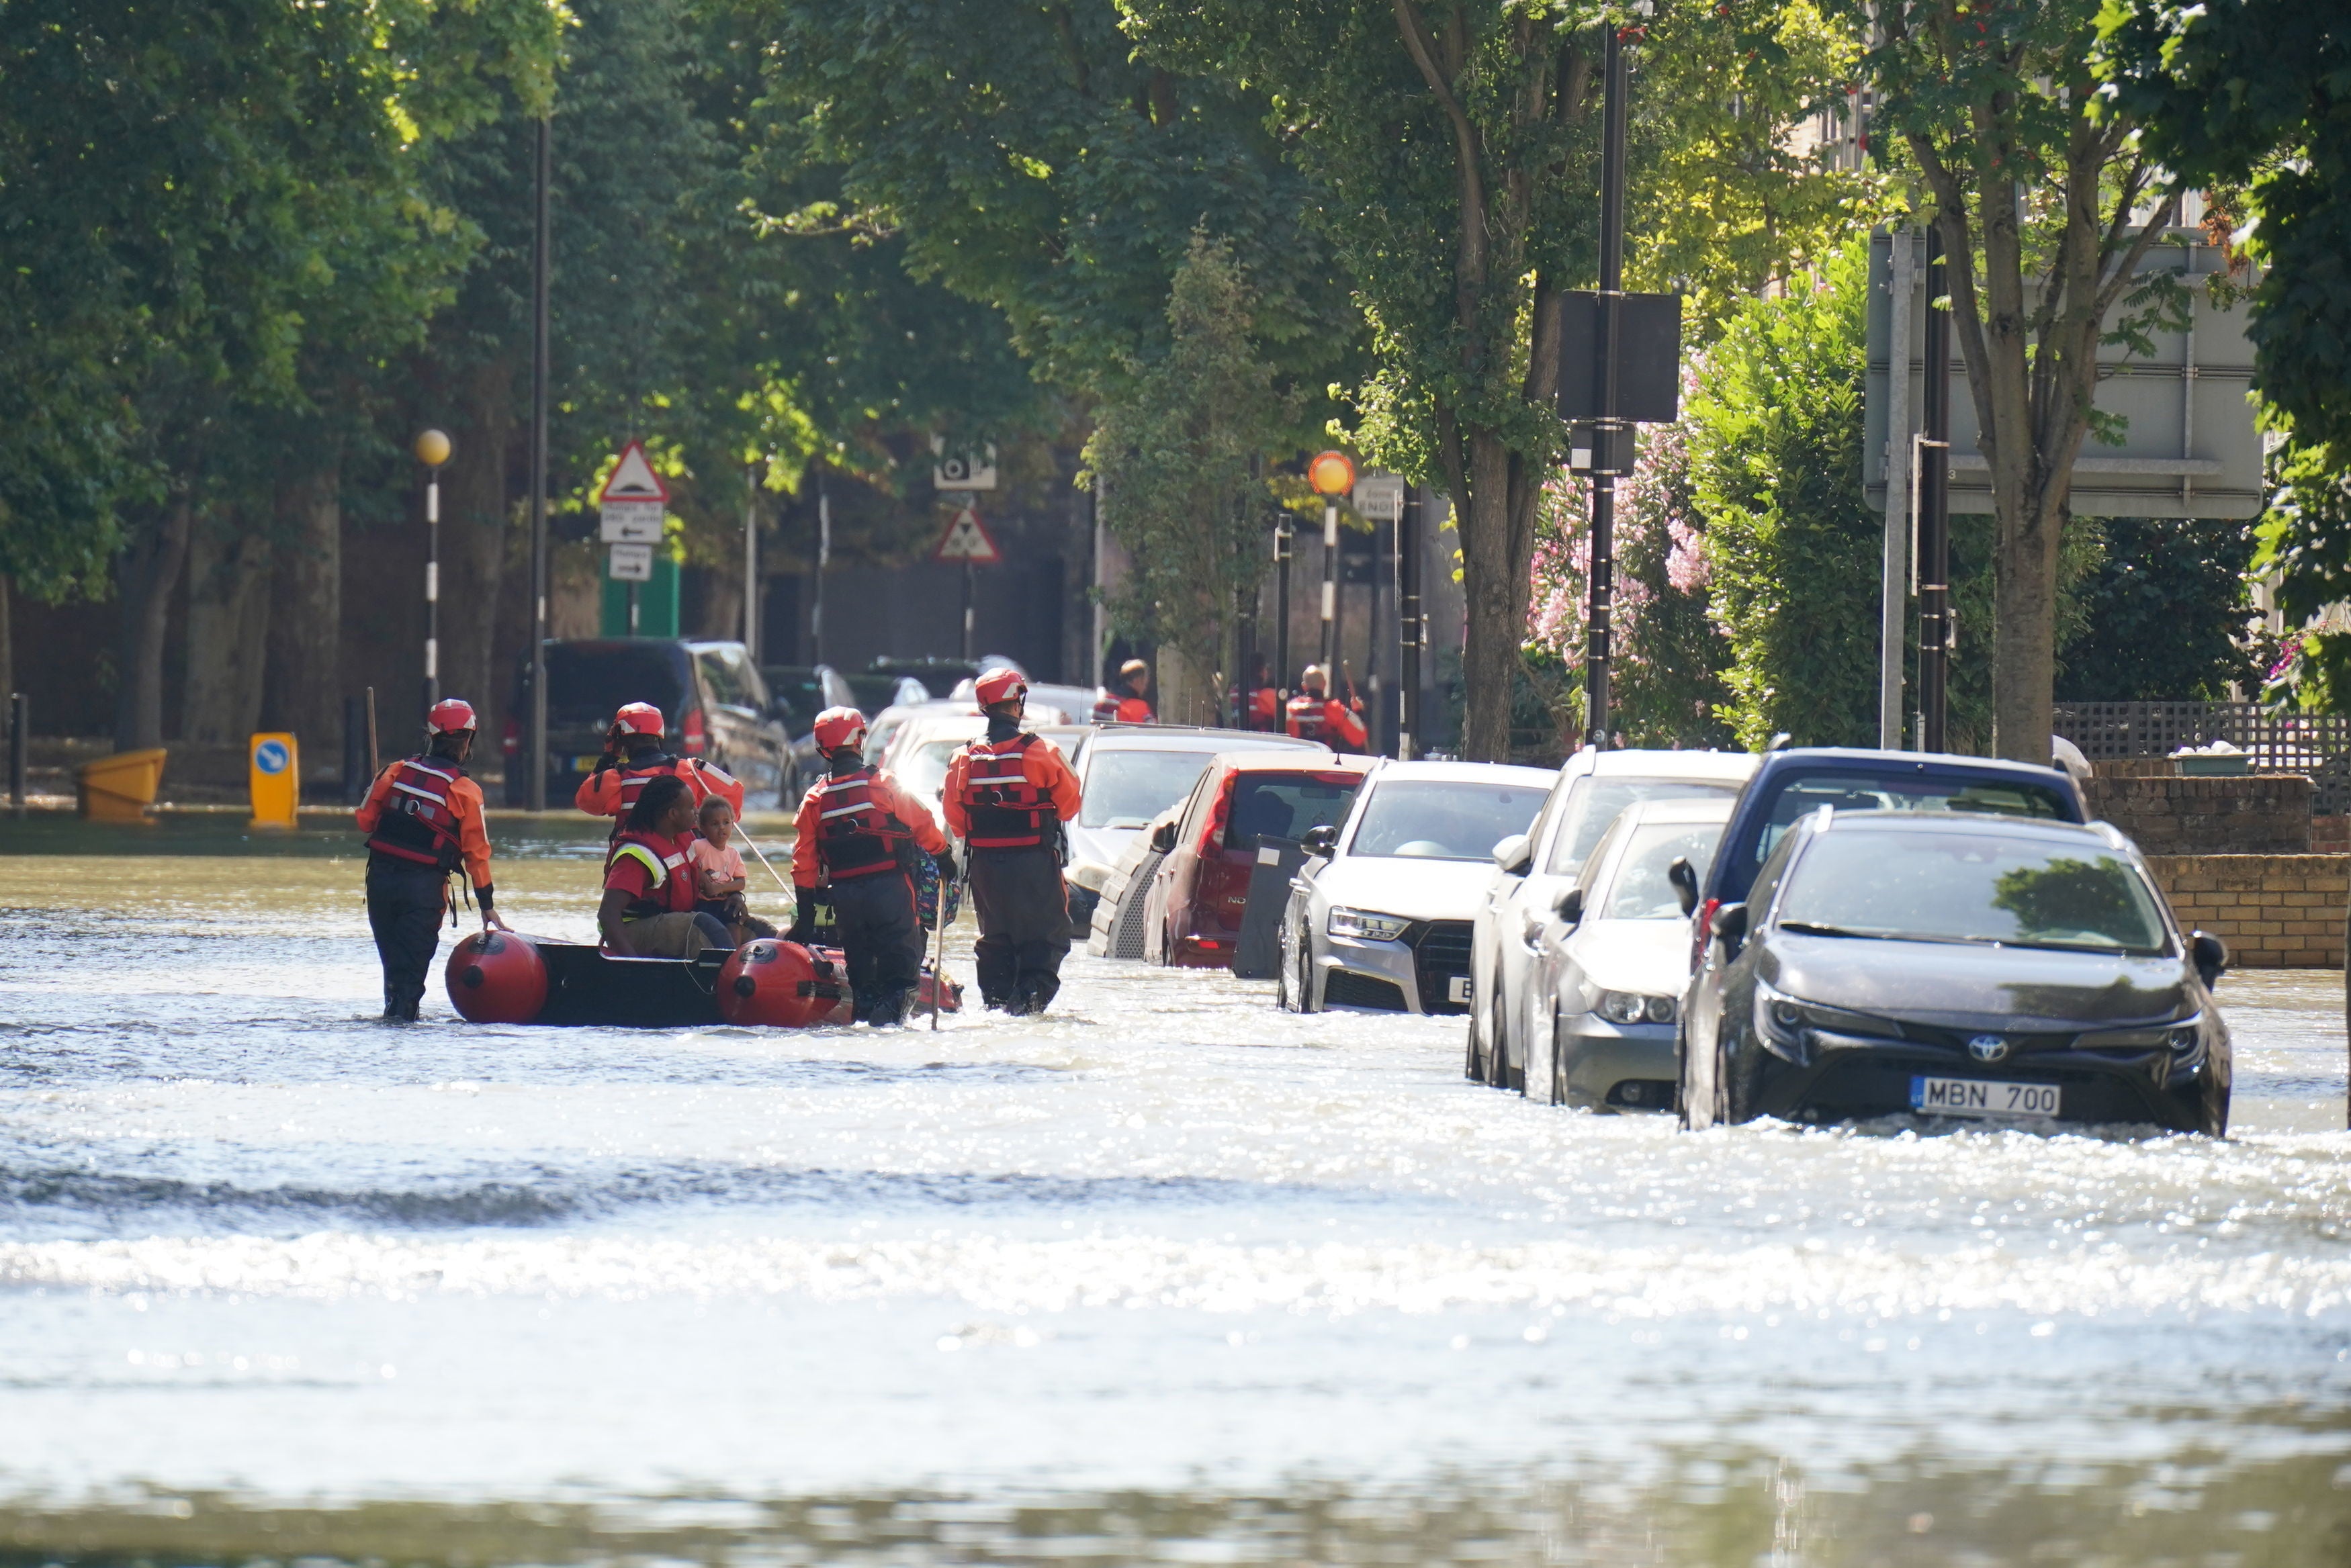 London Fire Brigade help ferry residents along Hornsey Road in north London after a water main burst, causing flooding up to 4ft deep